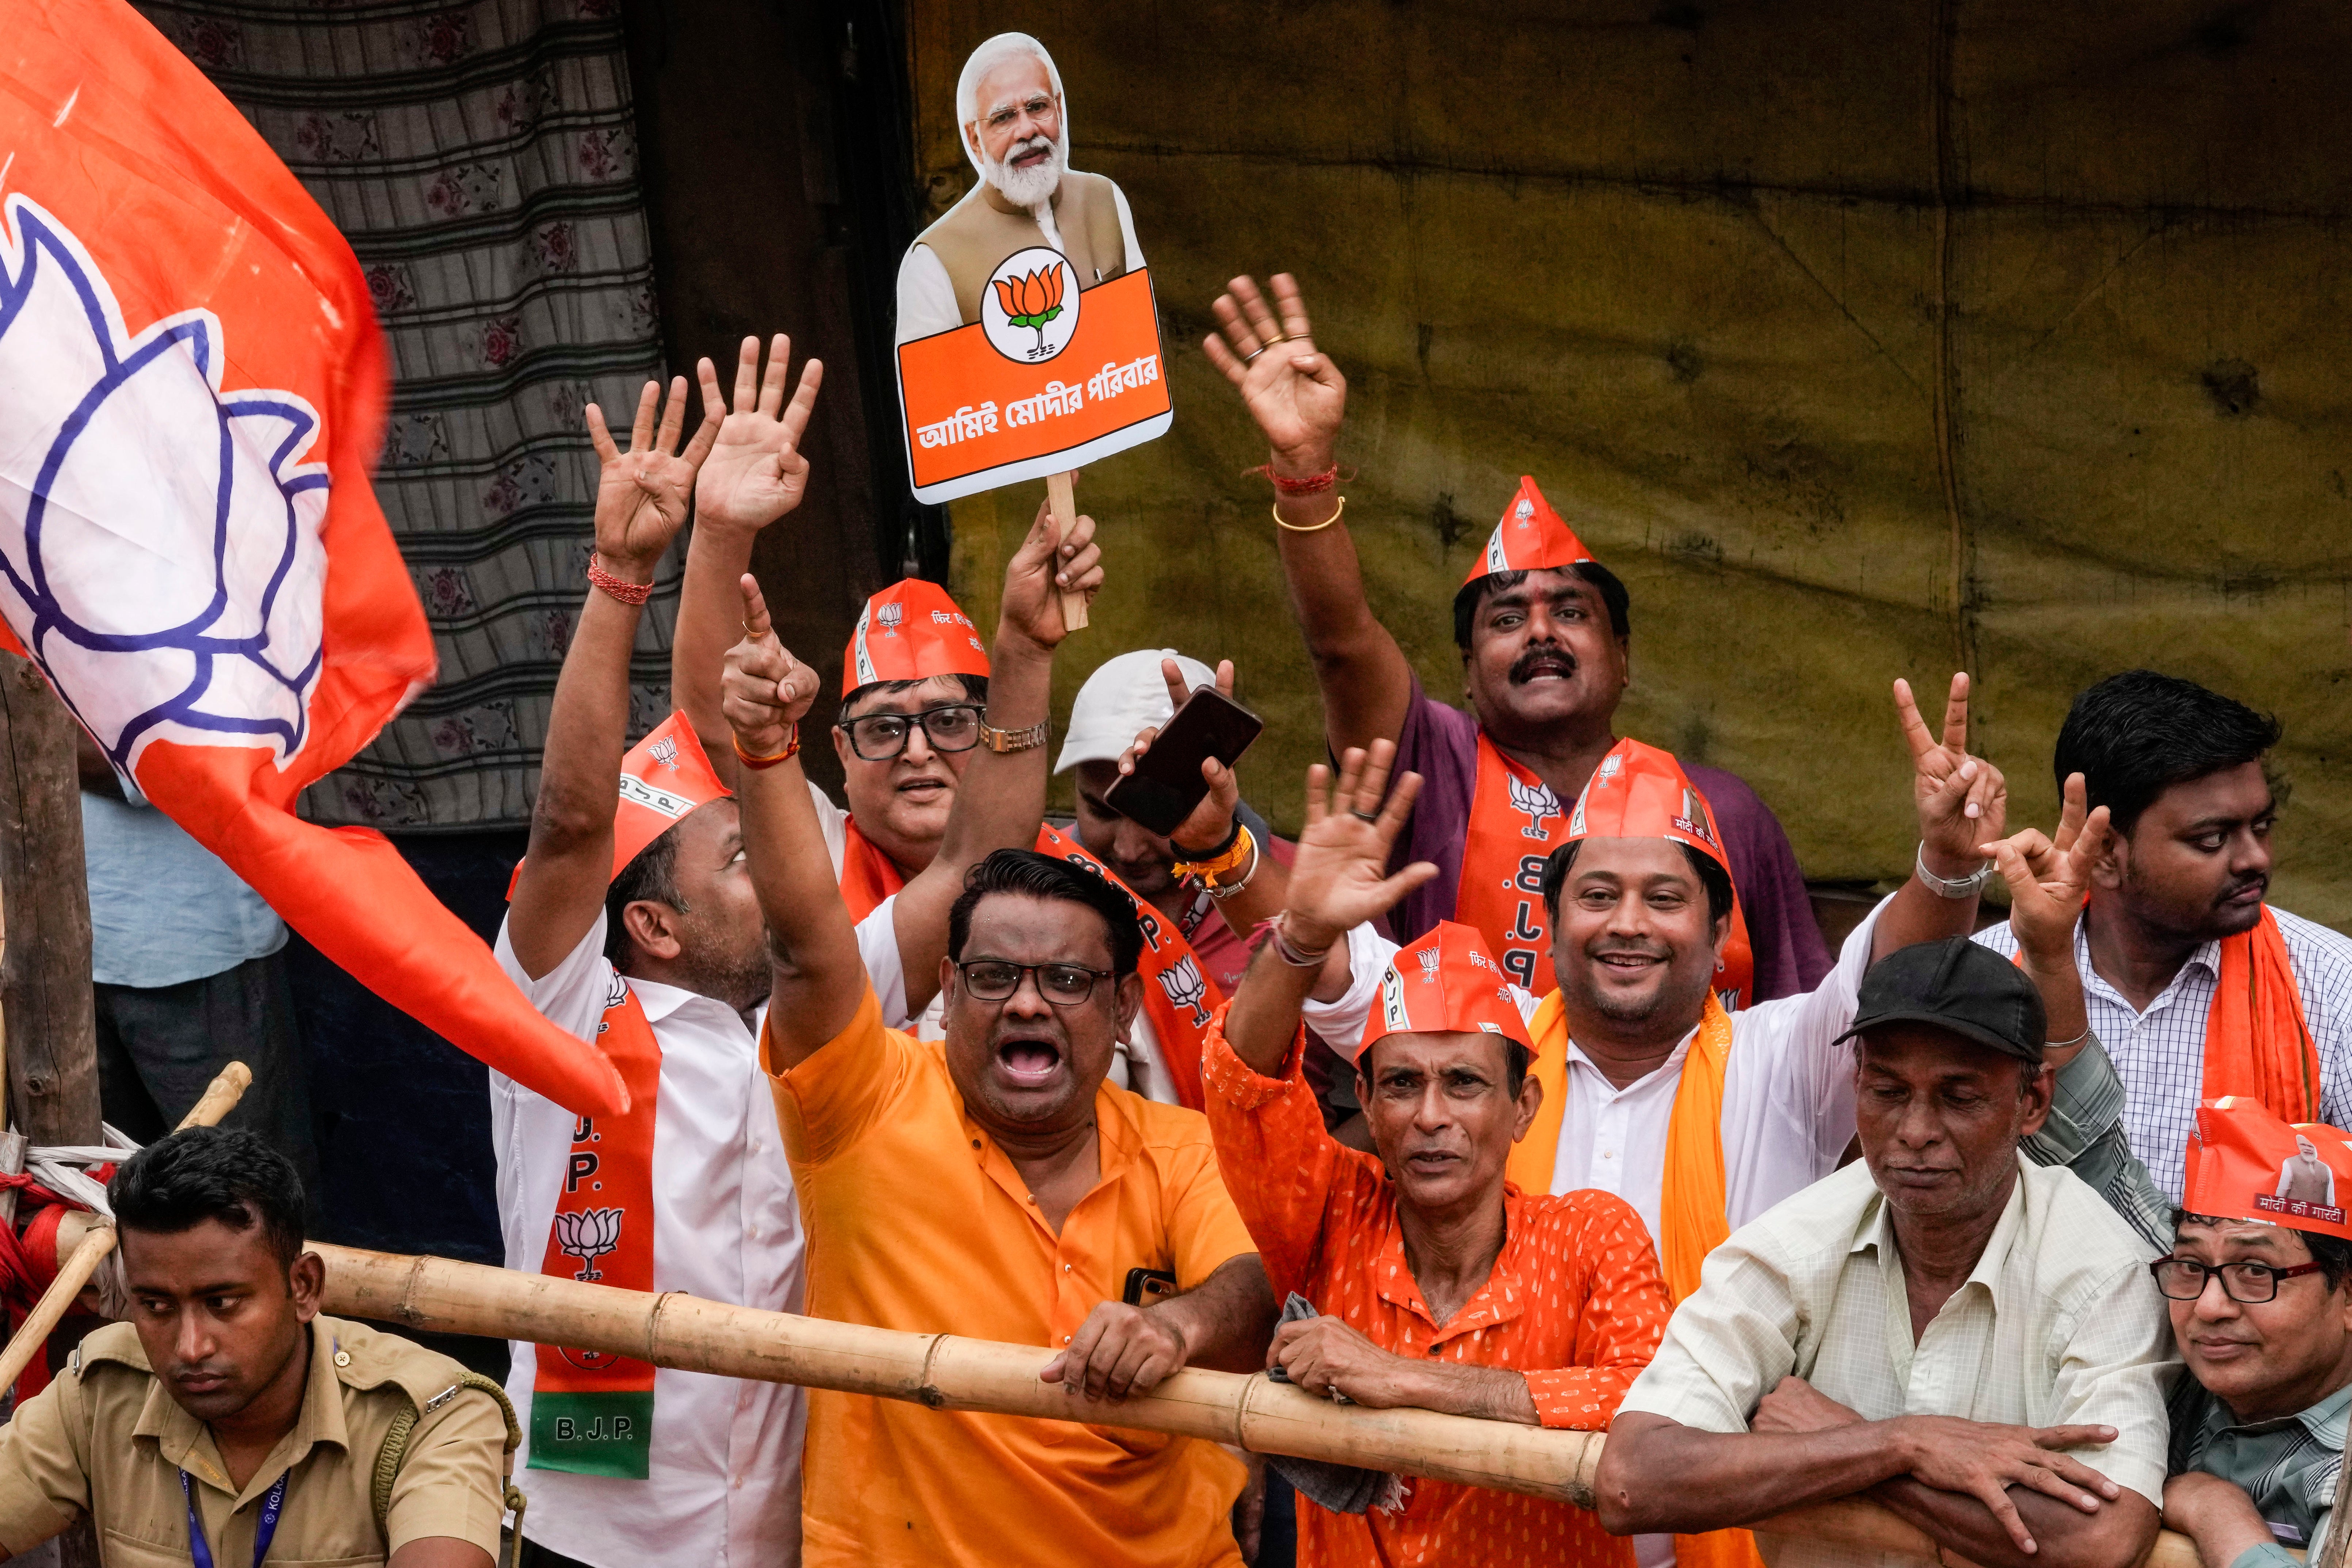 Supporters cheer to welcome Modi during a roadshow ahead of the last phase of elections in Kolkata, India on Tuesday